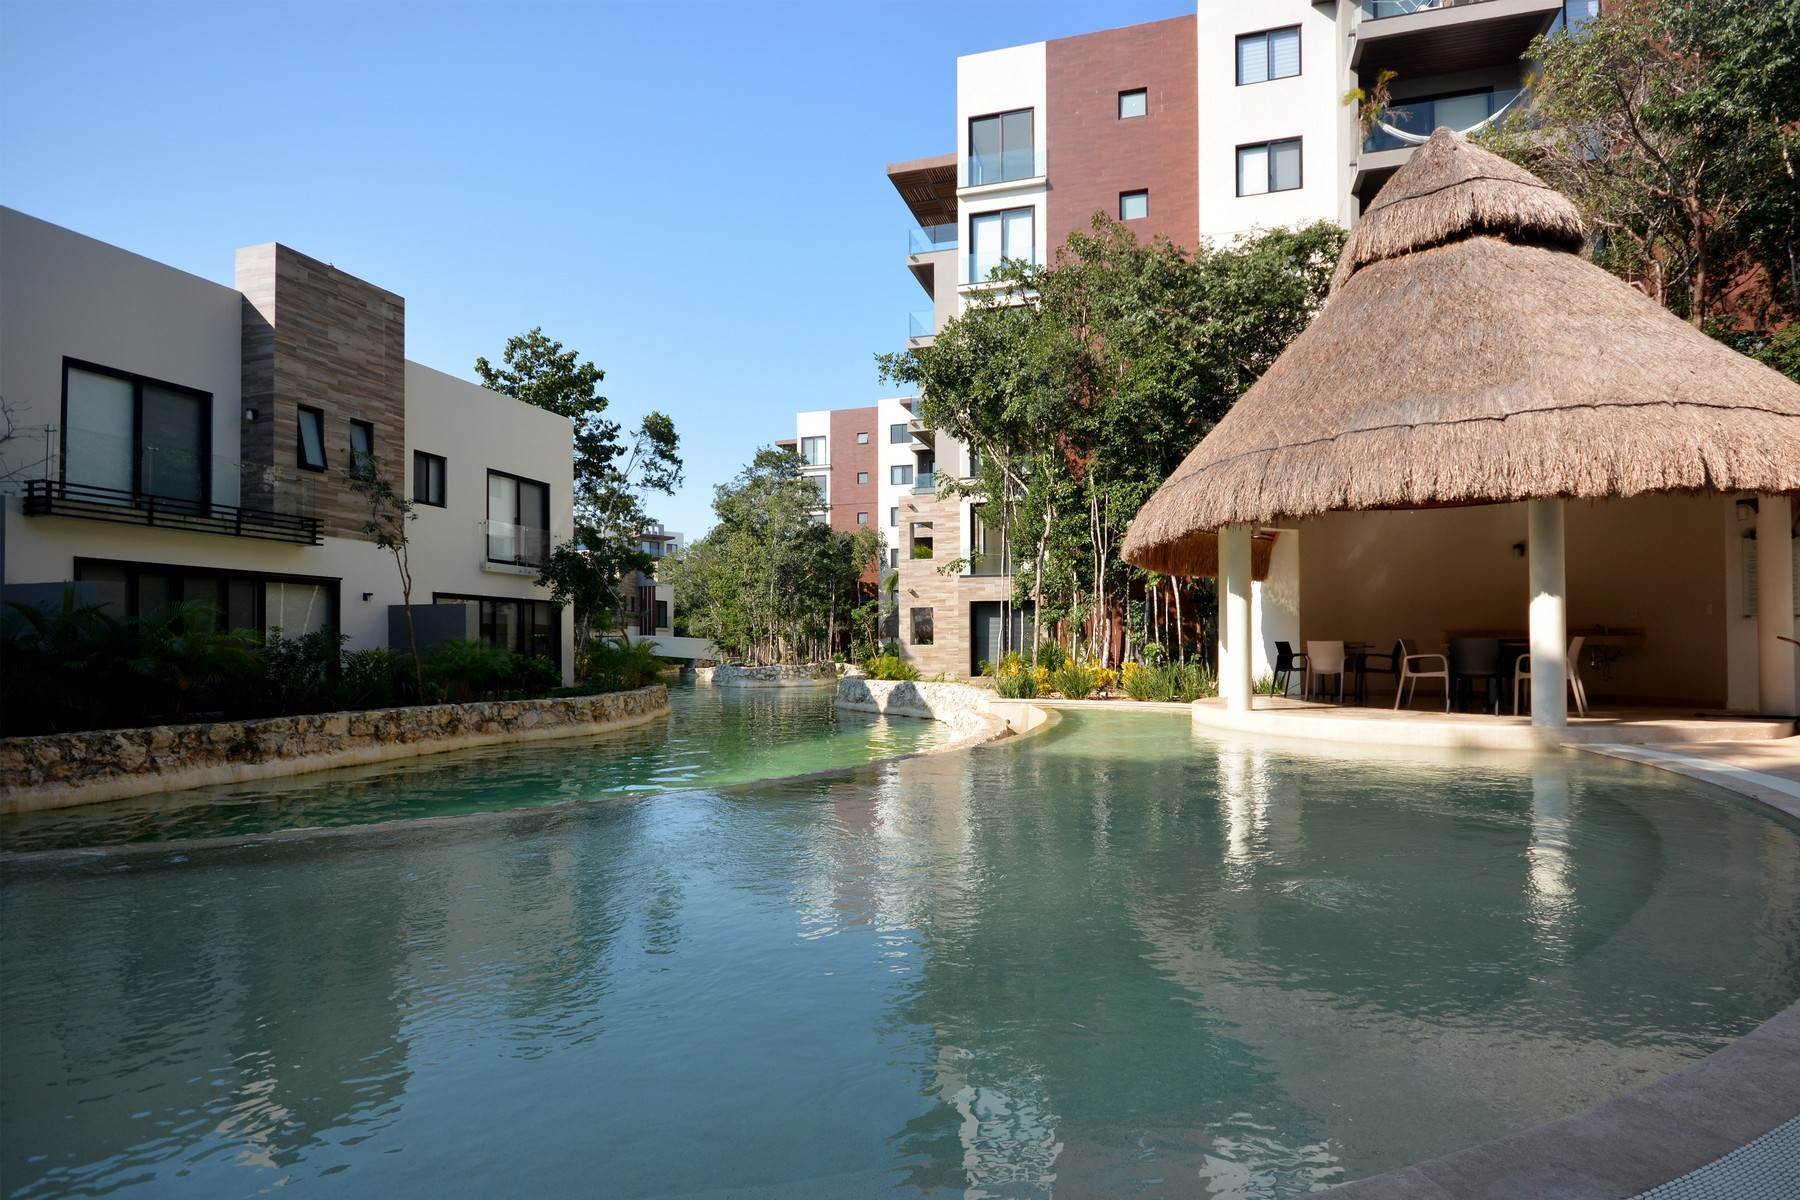 Condominiums for Sale at INSPIRING APARTMENT WITH INCREDIBLE VIEWS TO THE JUNGLE INSPIRING APARTMENT WITH INCREDIBLE VIEWS TO THE JUNGLE, Playa Del Carmen, Quintana Roo 77724 Mexico